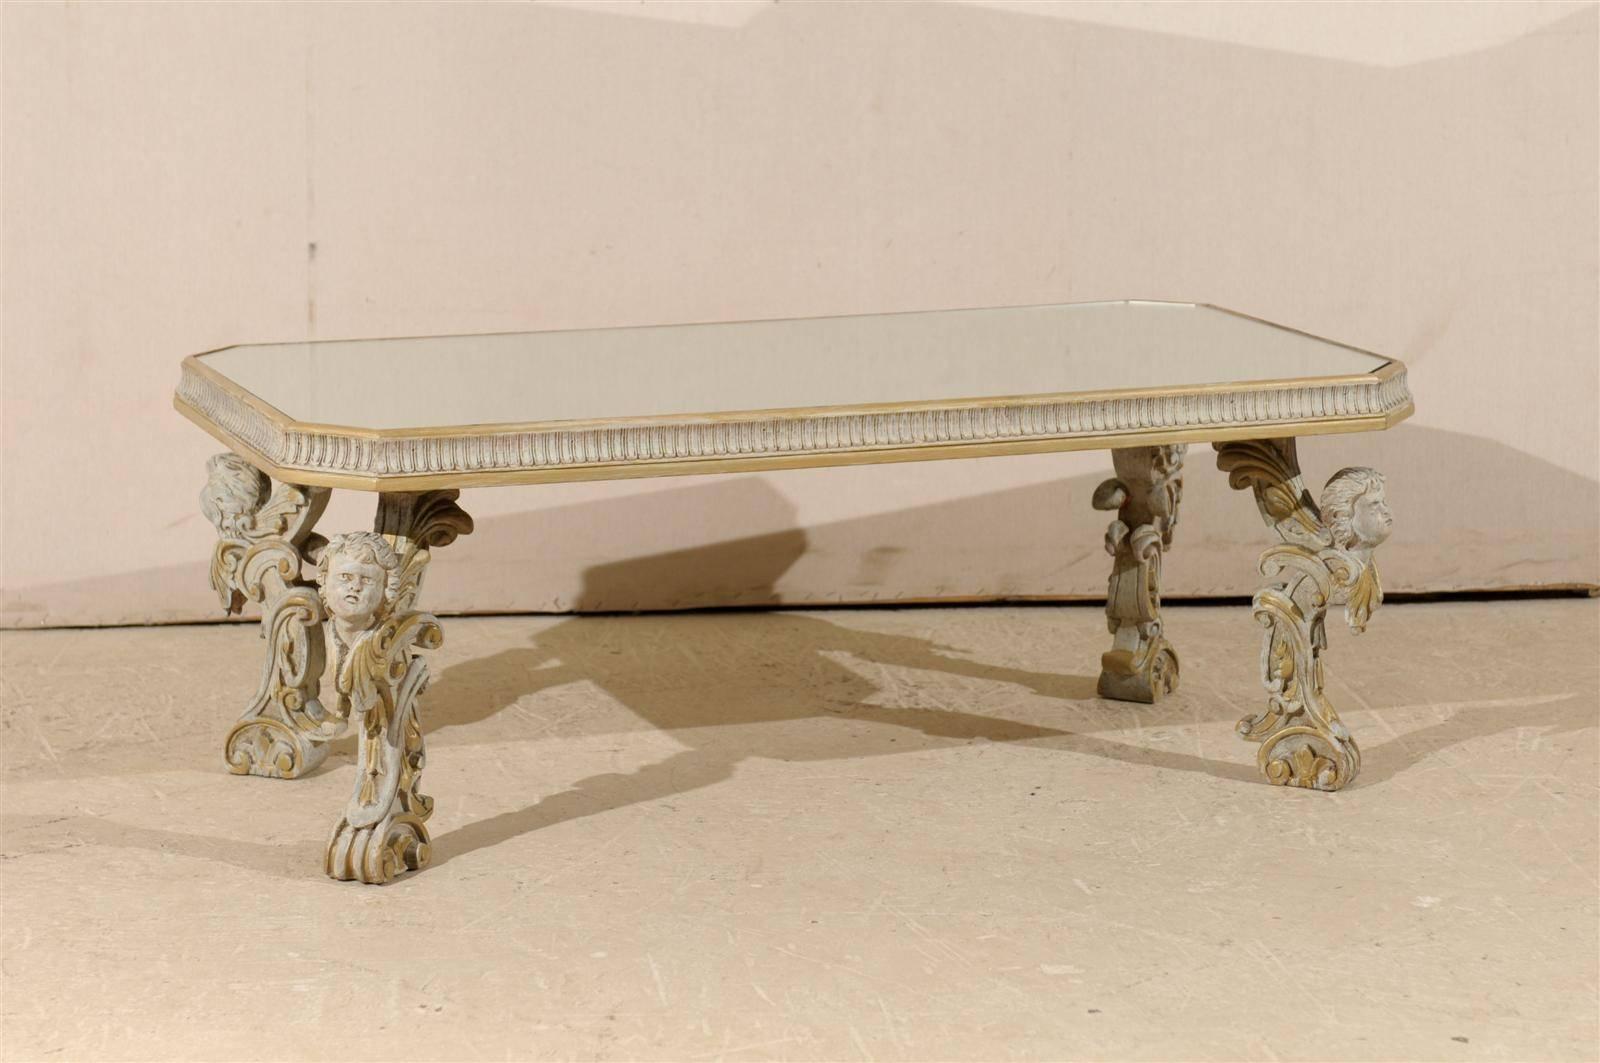 An Italian mirrored top wooden coffee table with putti-carved legs from the early 20th century. This exquisite Italian coffee table from the 1920s is made of a mirrored top with chamfered sides, over richly embellished legs, each decorated with a